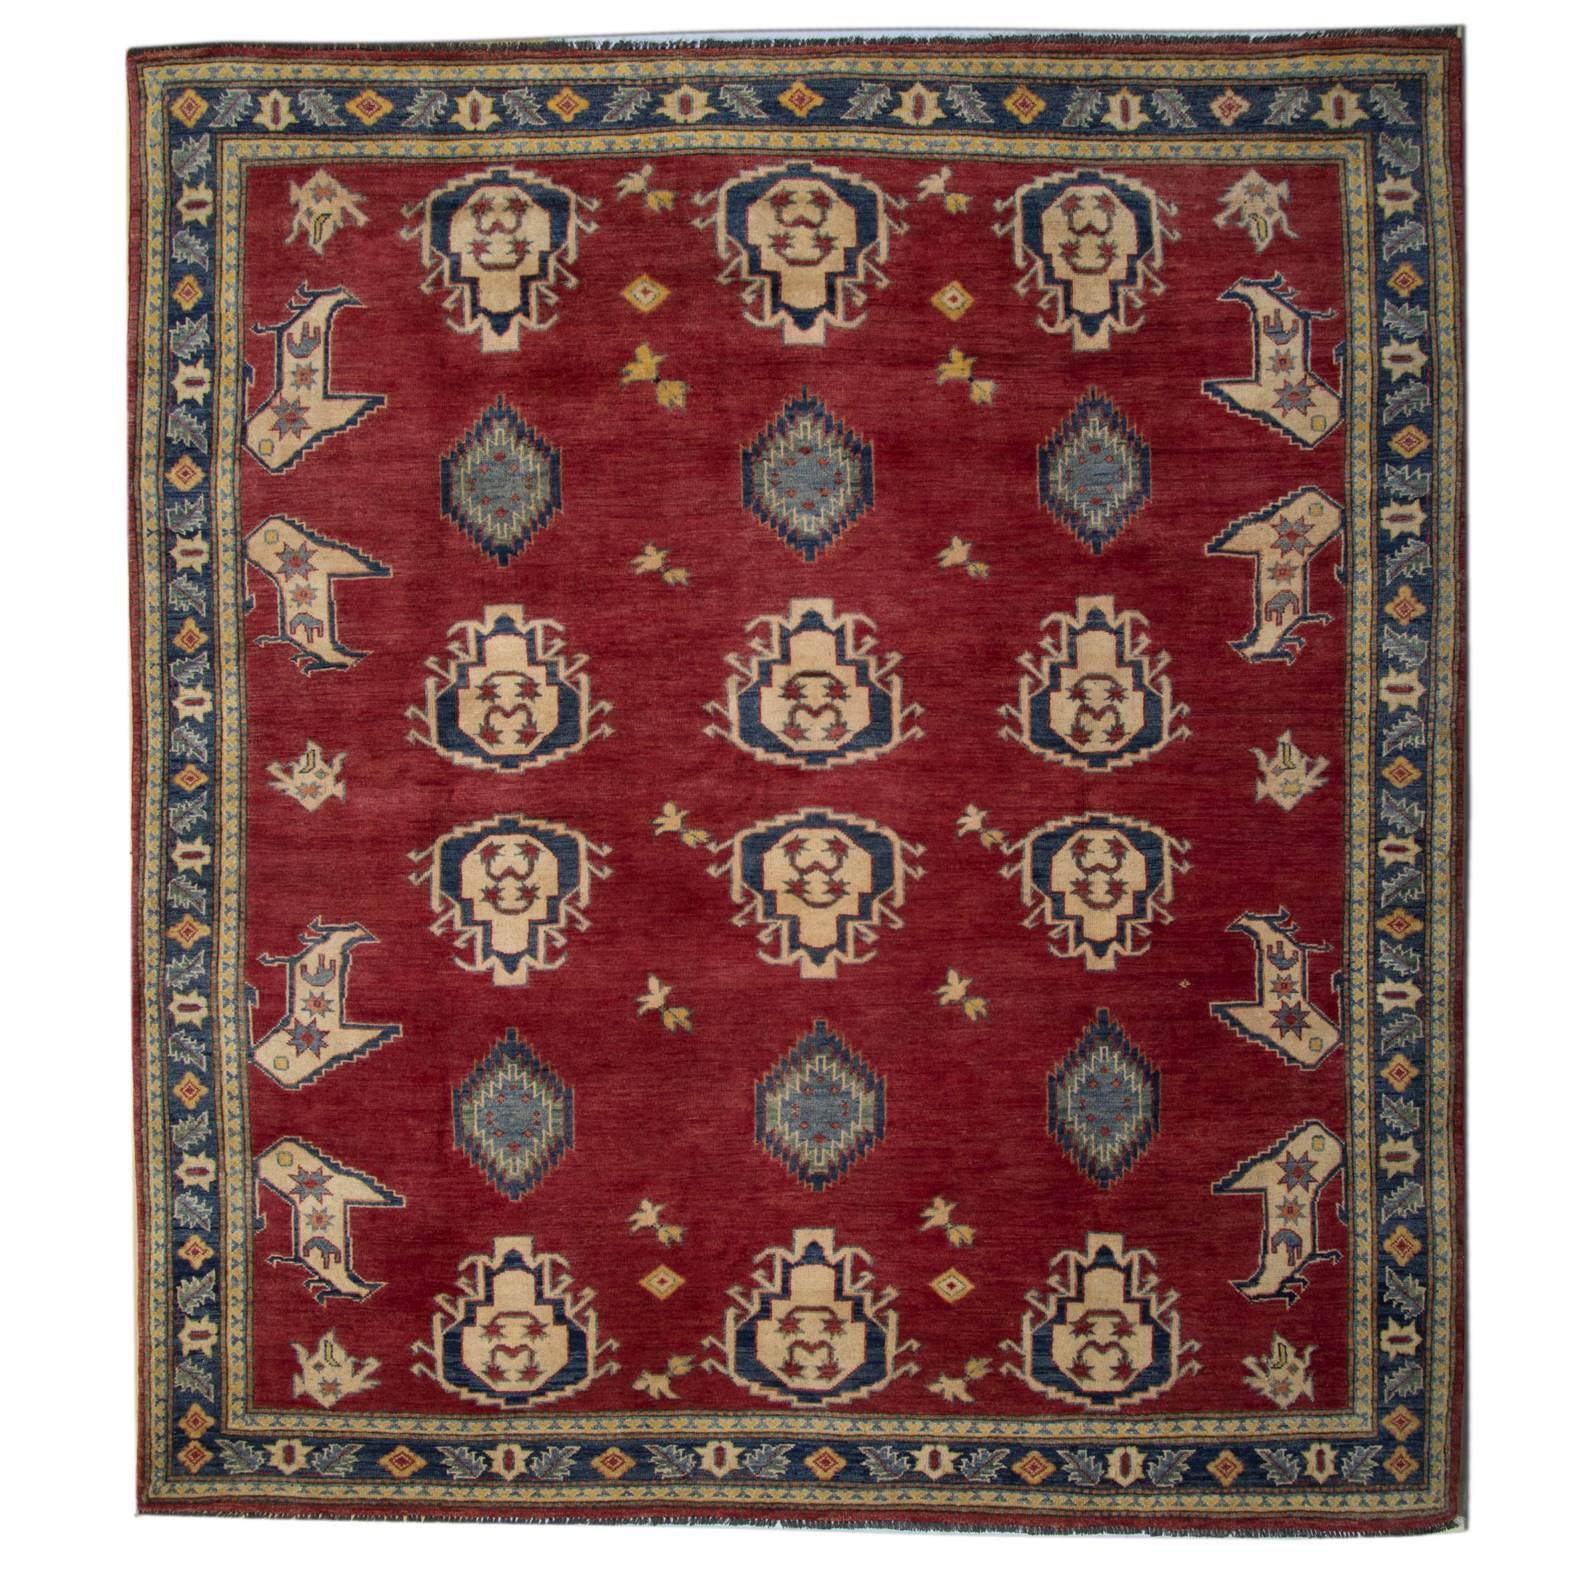 Oriental Rugs, Red Square Rugs, Geometric Wool Hand Made Carpet for Sale